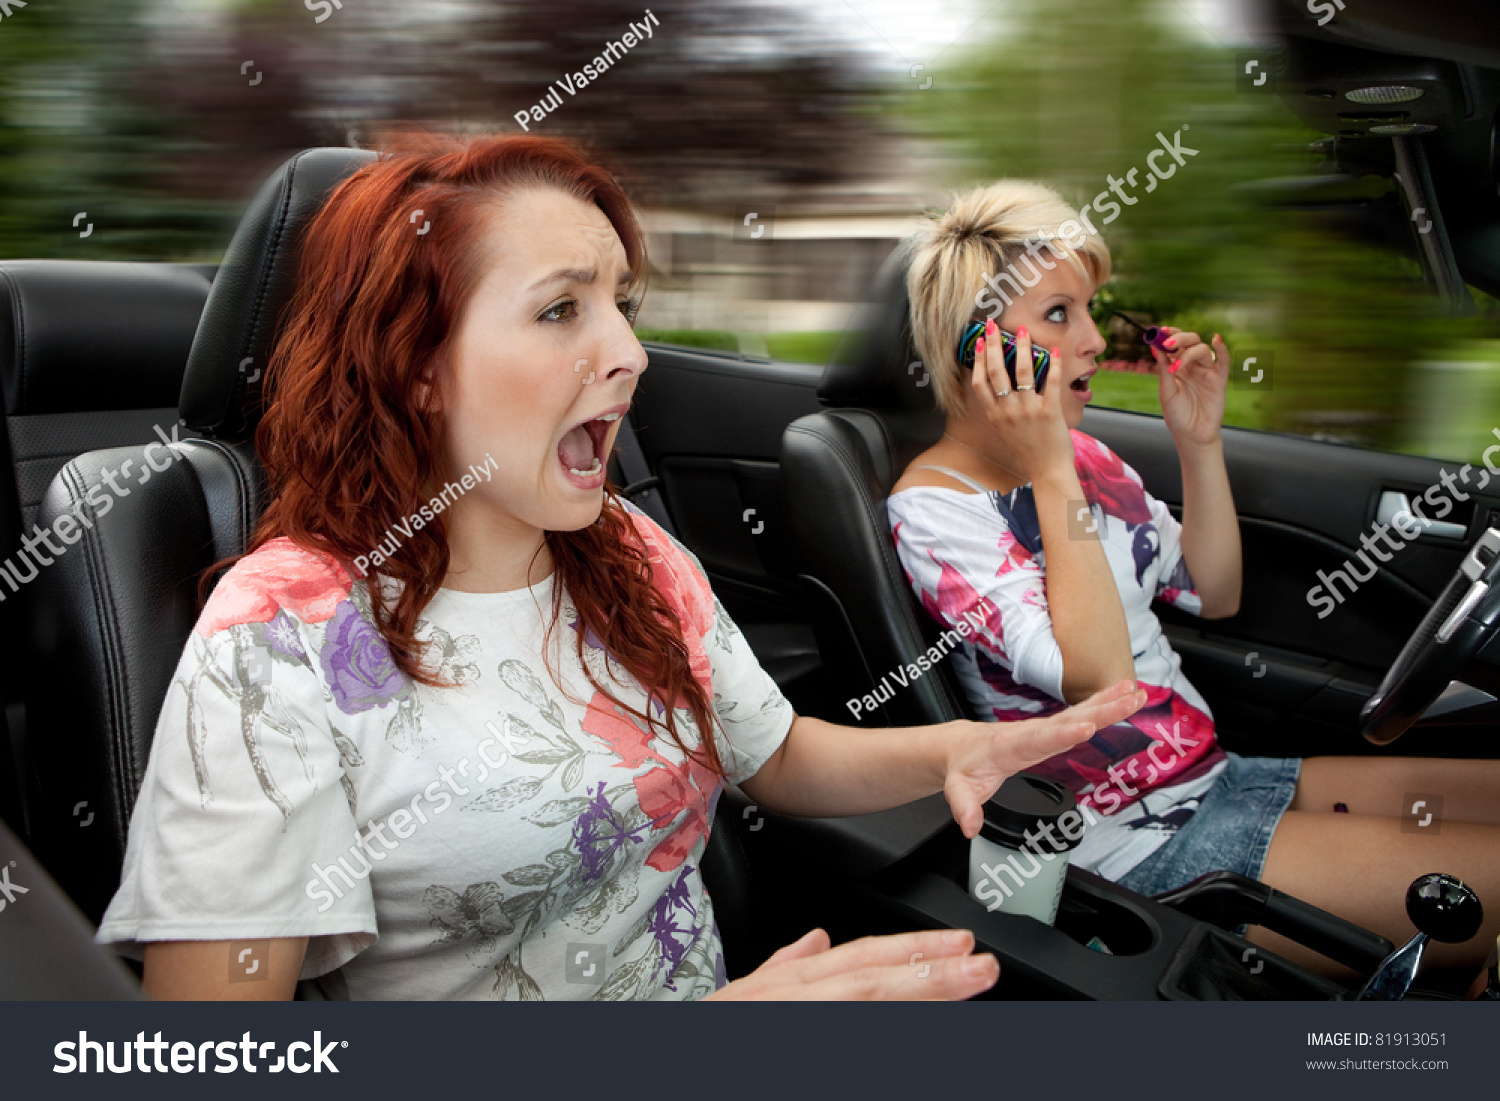 stock-photo-distracted-dangerous-driving